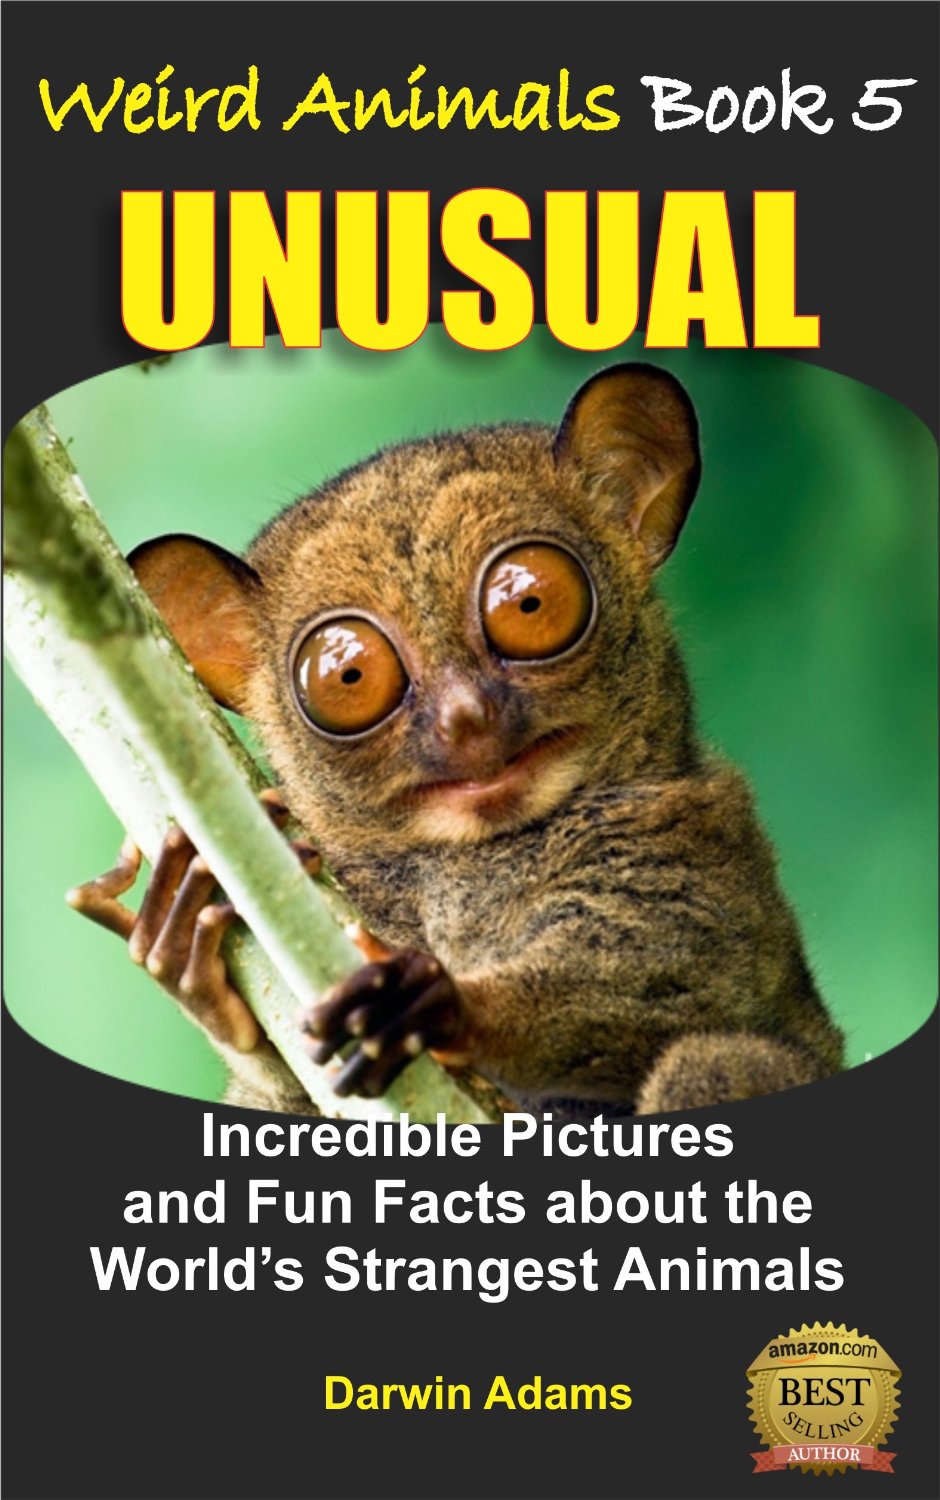 Weird Animals #5 – UNUSUAL – Amazing Pictures and Fun Facts about the World’s Strangest Animals by Darwin Adams